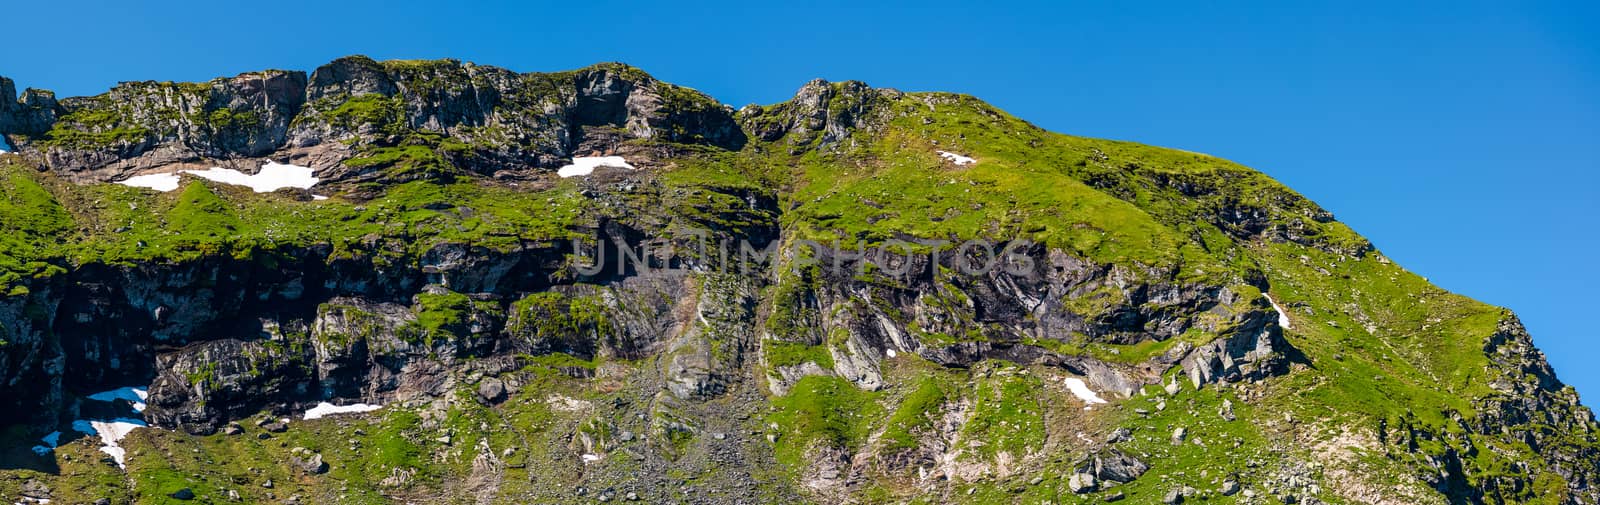 mountain ridge with rocky cliffs and grassy slopes by Pellinni